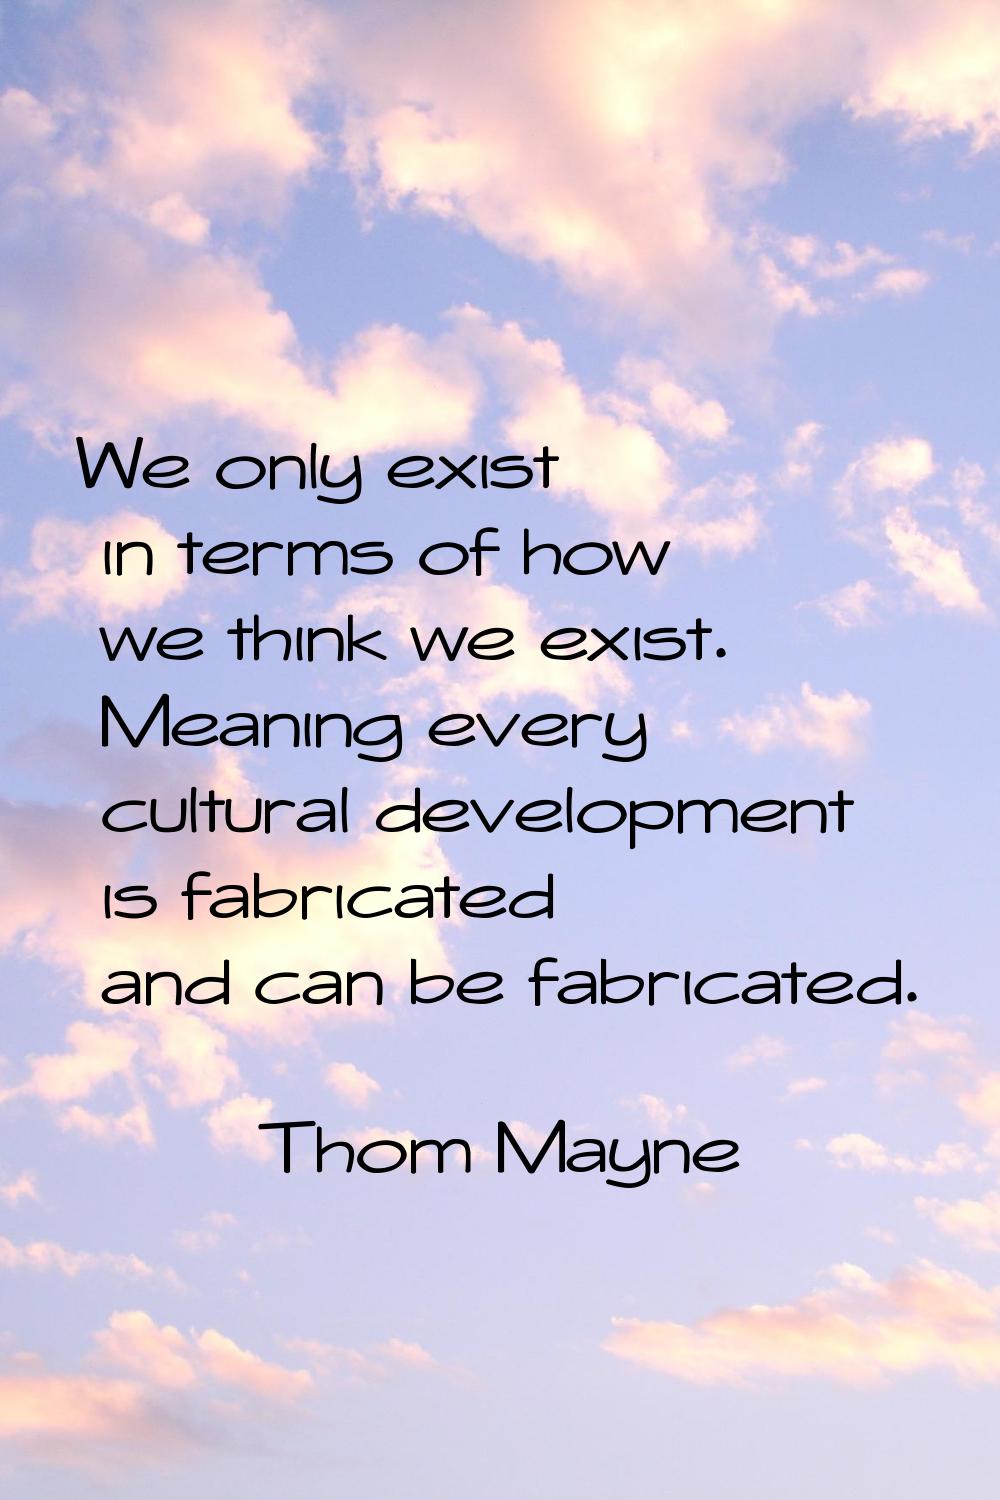 We only exist in terms of how we think we exist. Meaning every cultural development is fabricated a